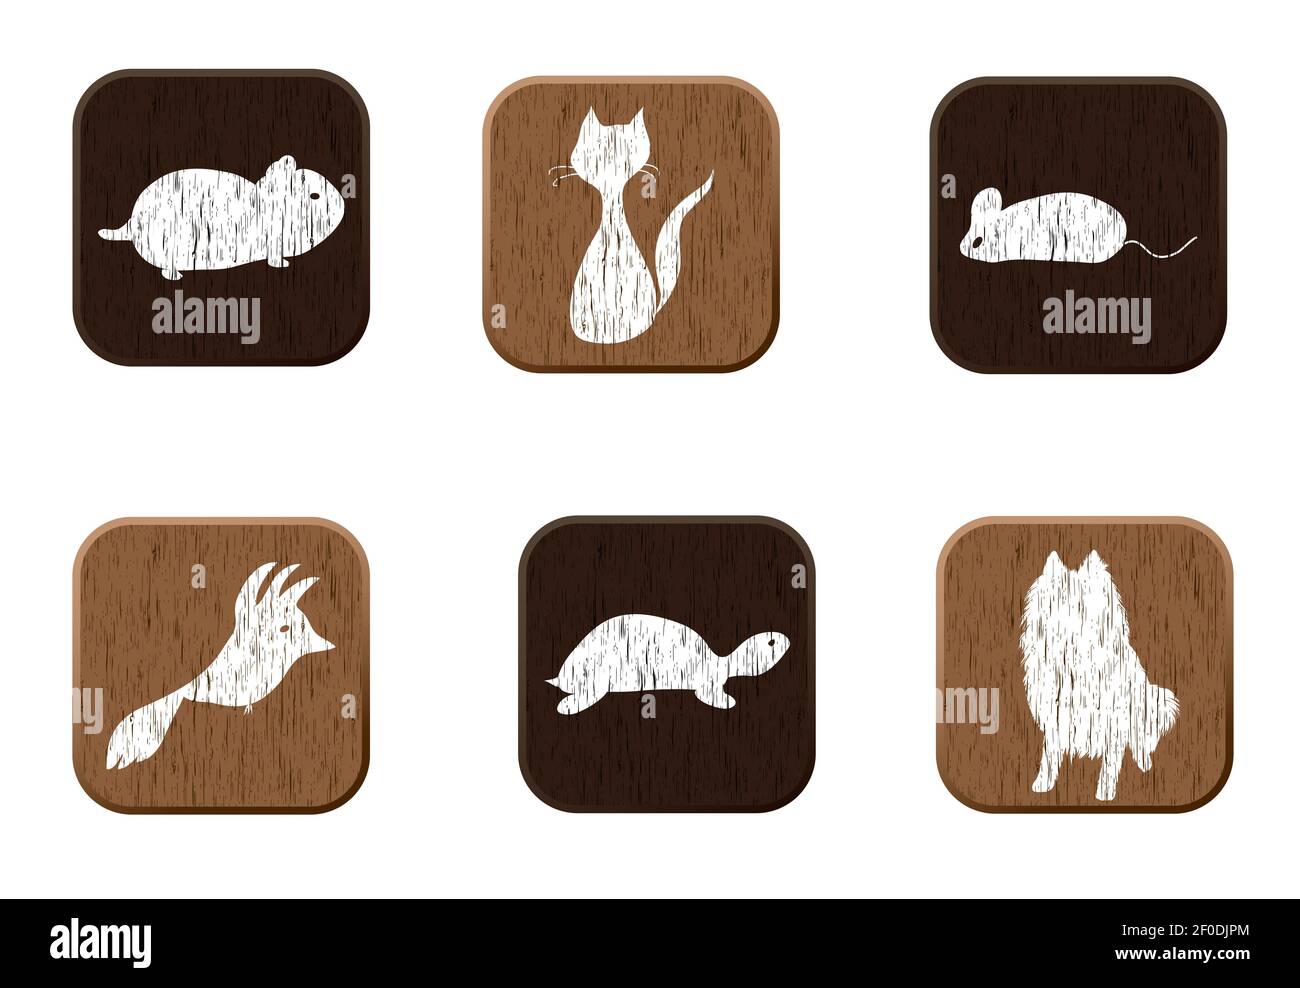 Pet shop wooden icons set with pets silhouettes. Stock Photo